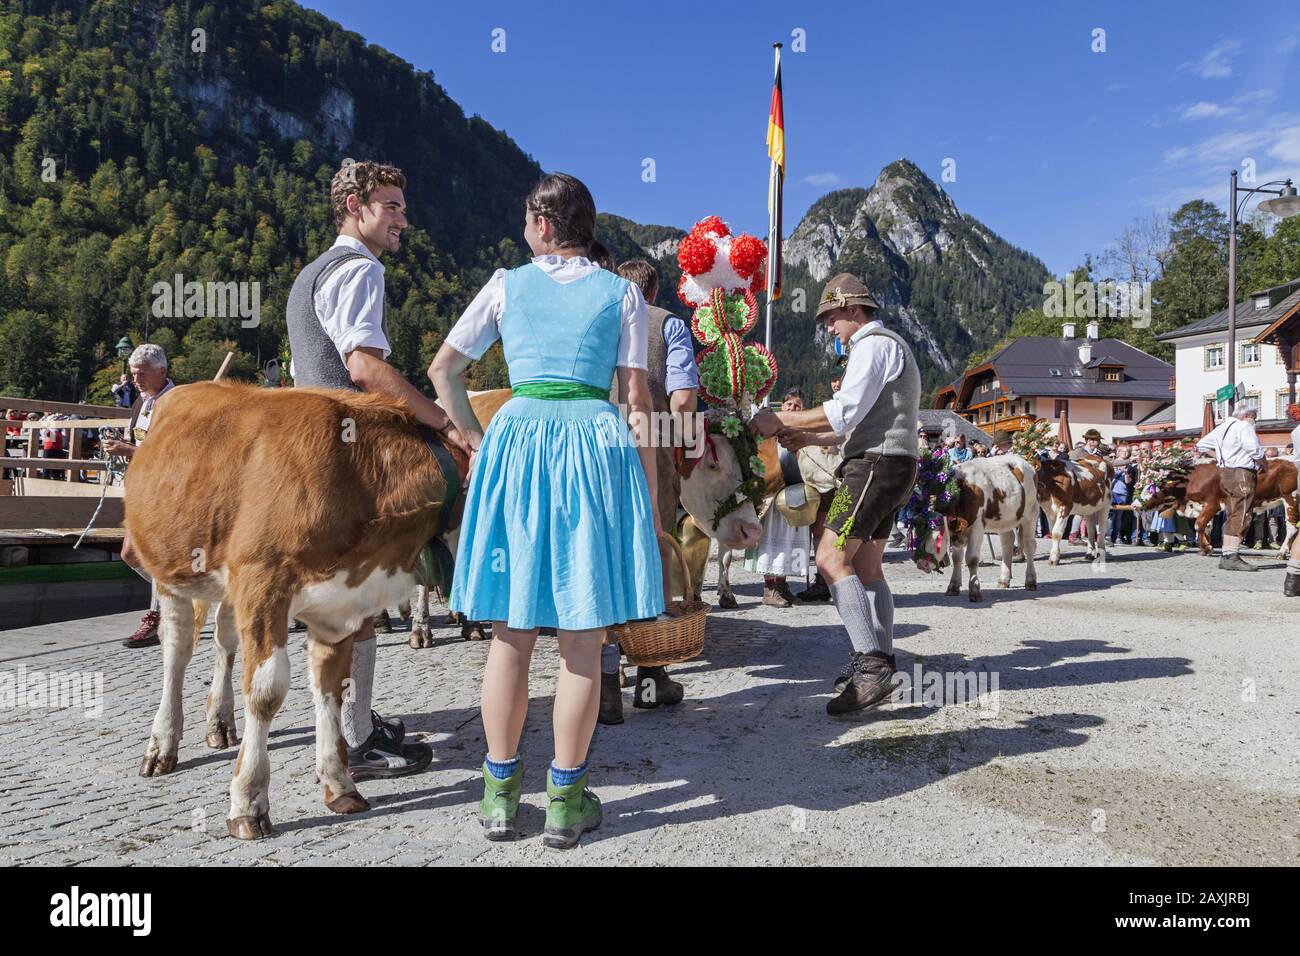 Aufkranzen', adornment of the cows at the cattle drive ('Almabtrieb') at Königssee, Saletalm (owned by the Resch family), arrival in Schönau, Berchtes Stock Photo